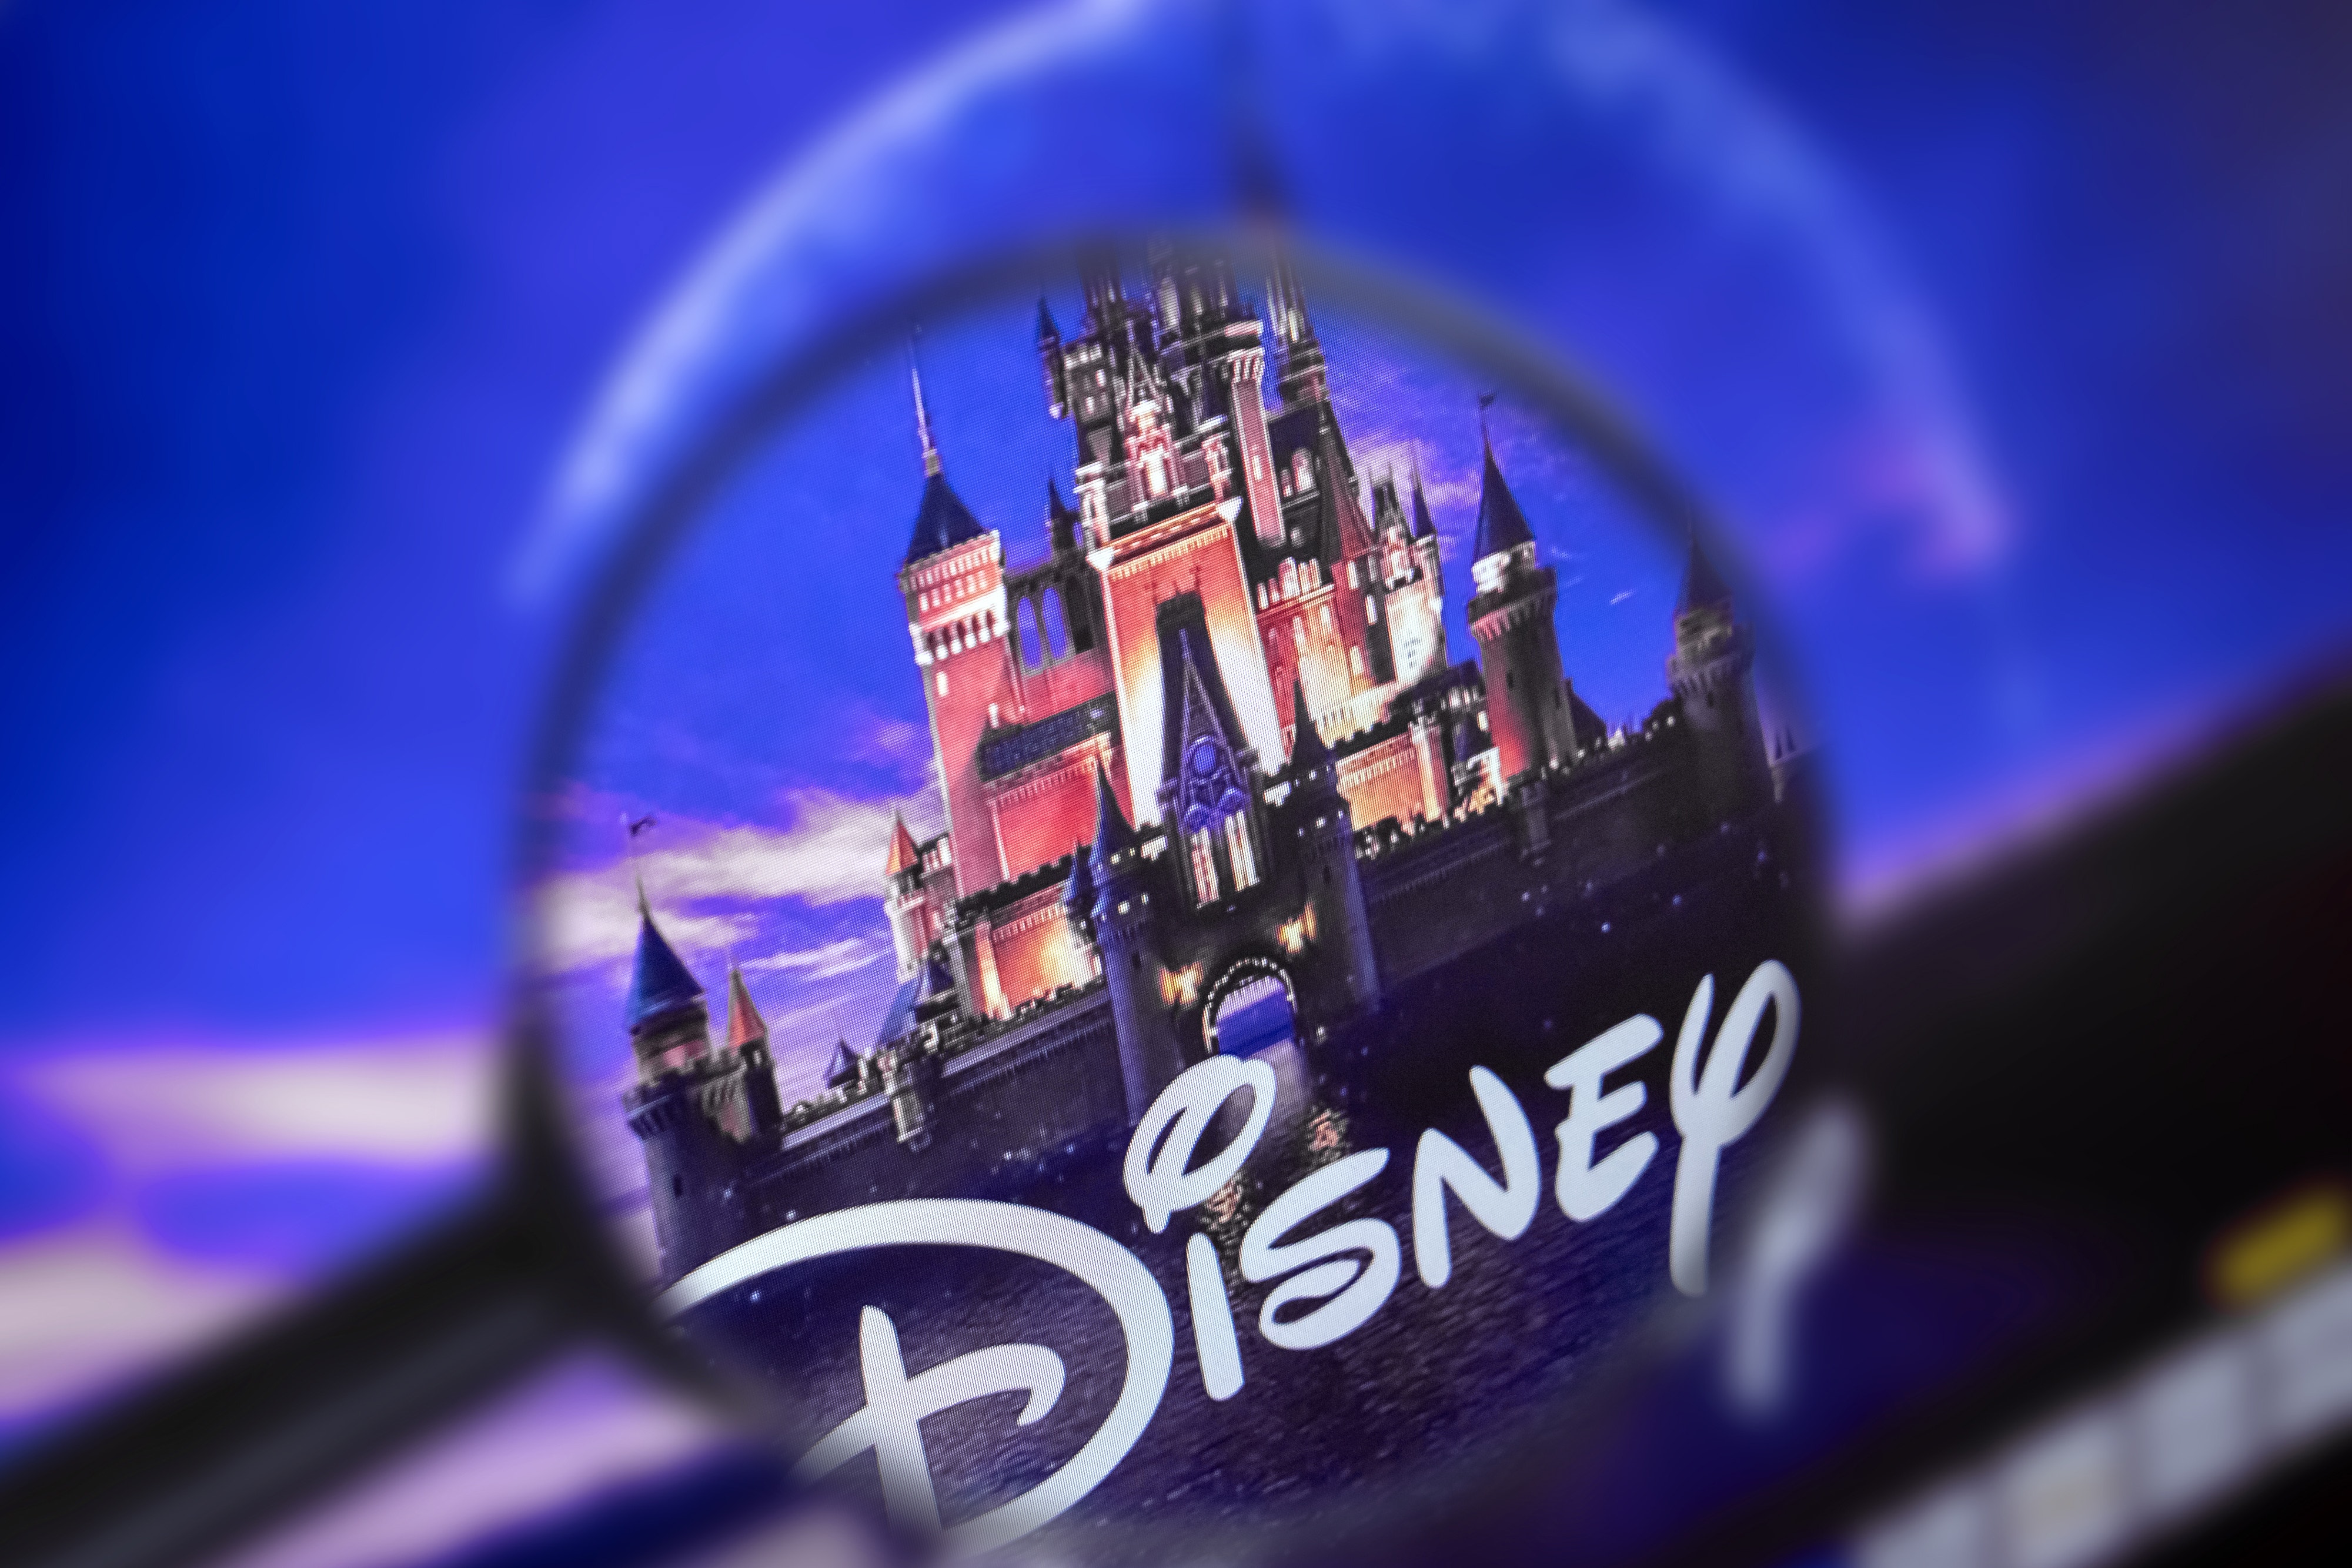 Tuesday's Market Minute: Walt Disney (DIS) Earnings Preview